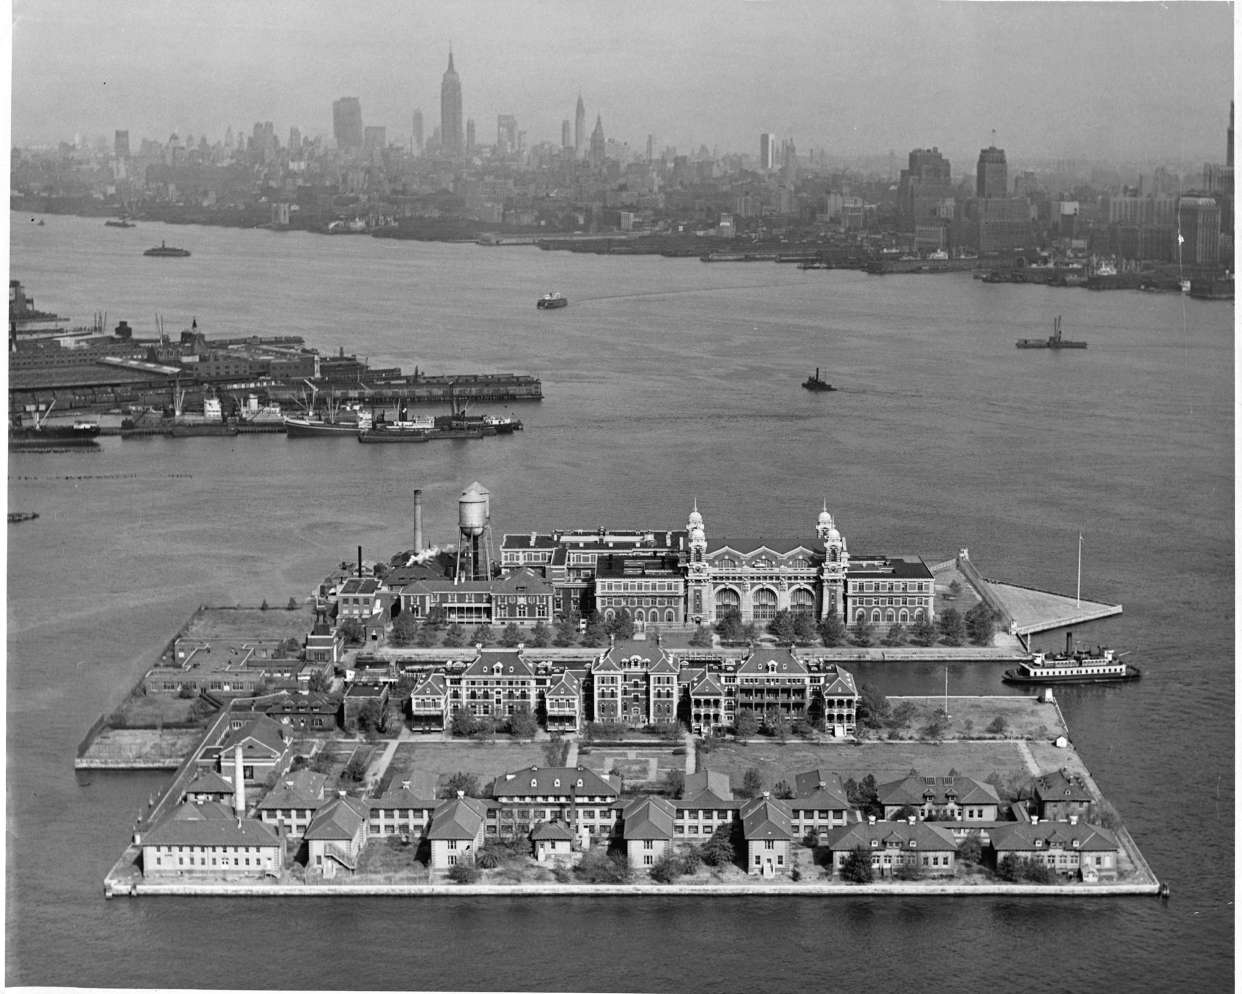 An air view of Ellis Island, in Upper New York Bay